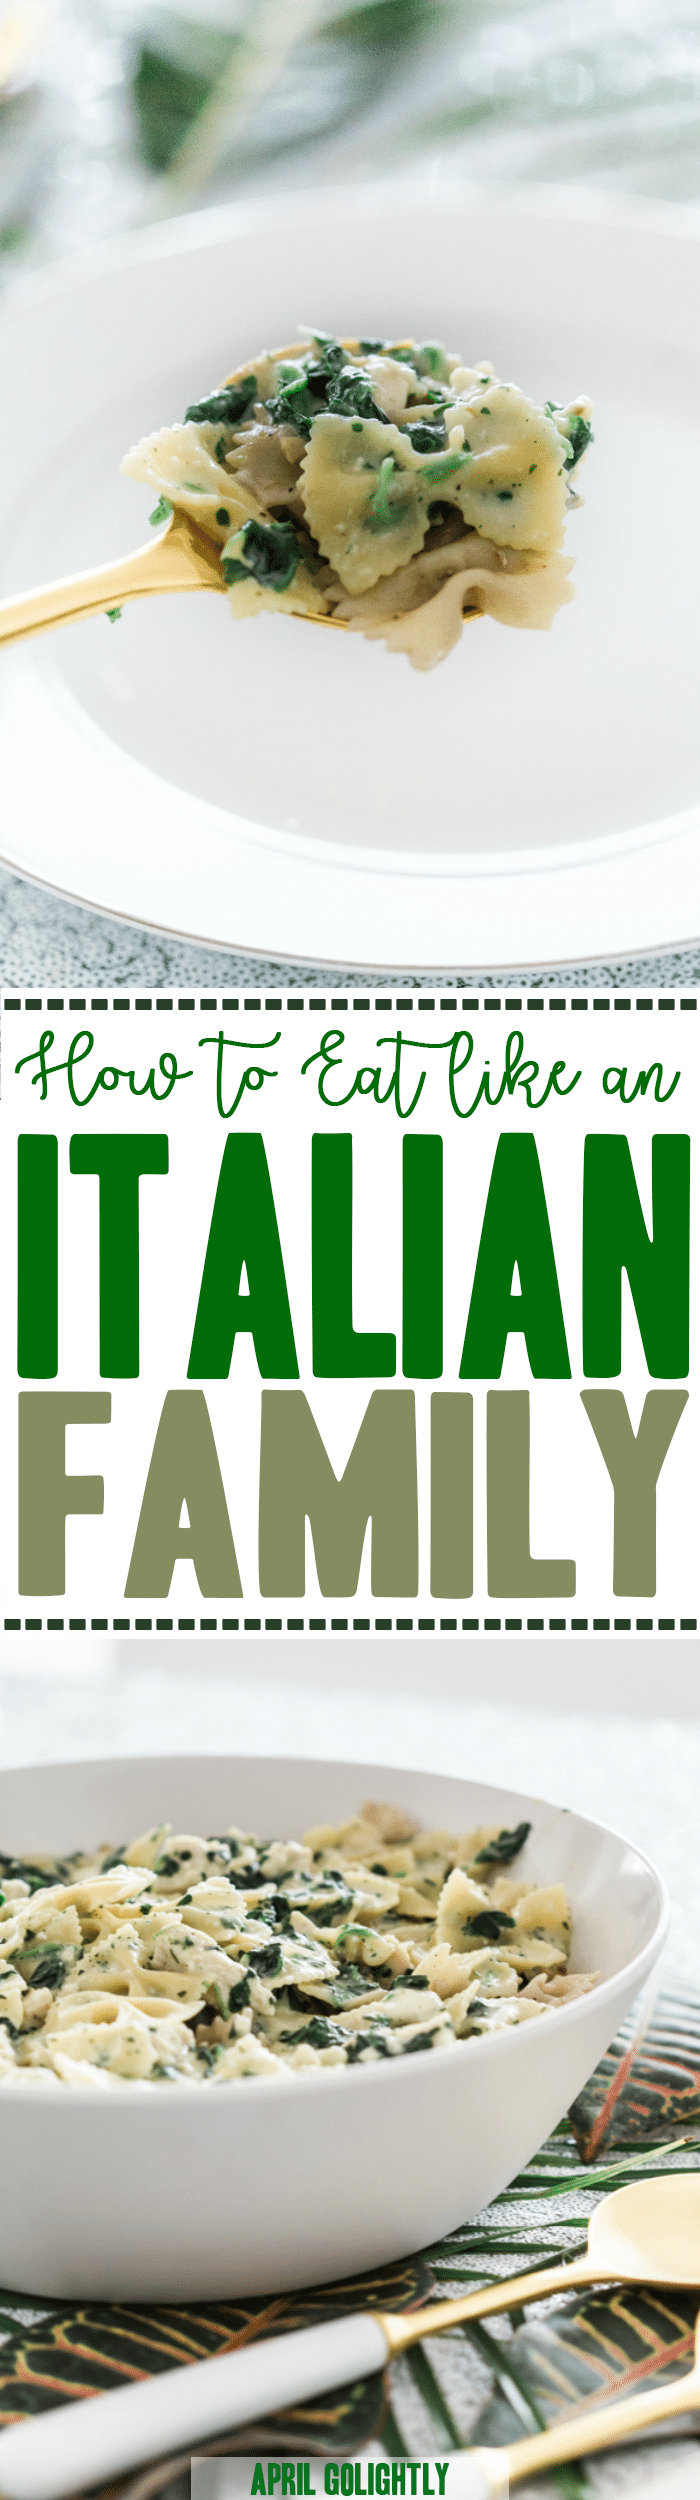 How to Eat Like an Italian Family - family dinner around the dinner table every week for Sunday Pasta. This shows you how to bring Mangia to your home! 